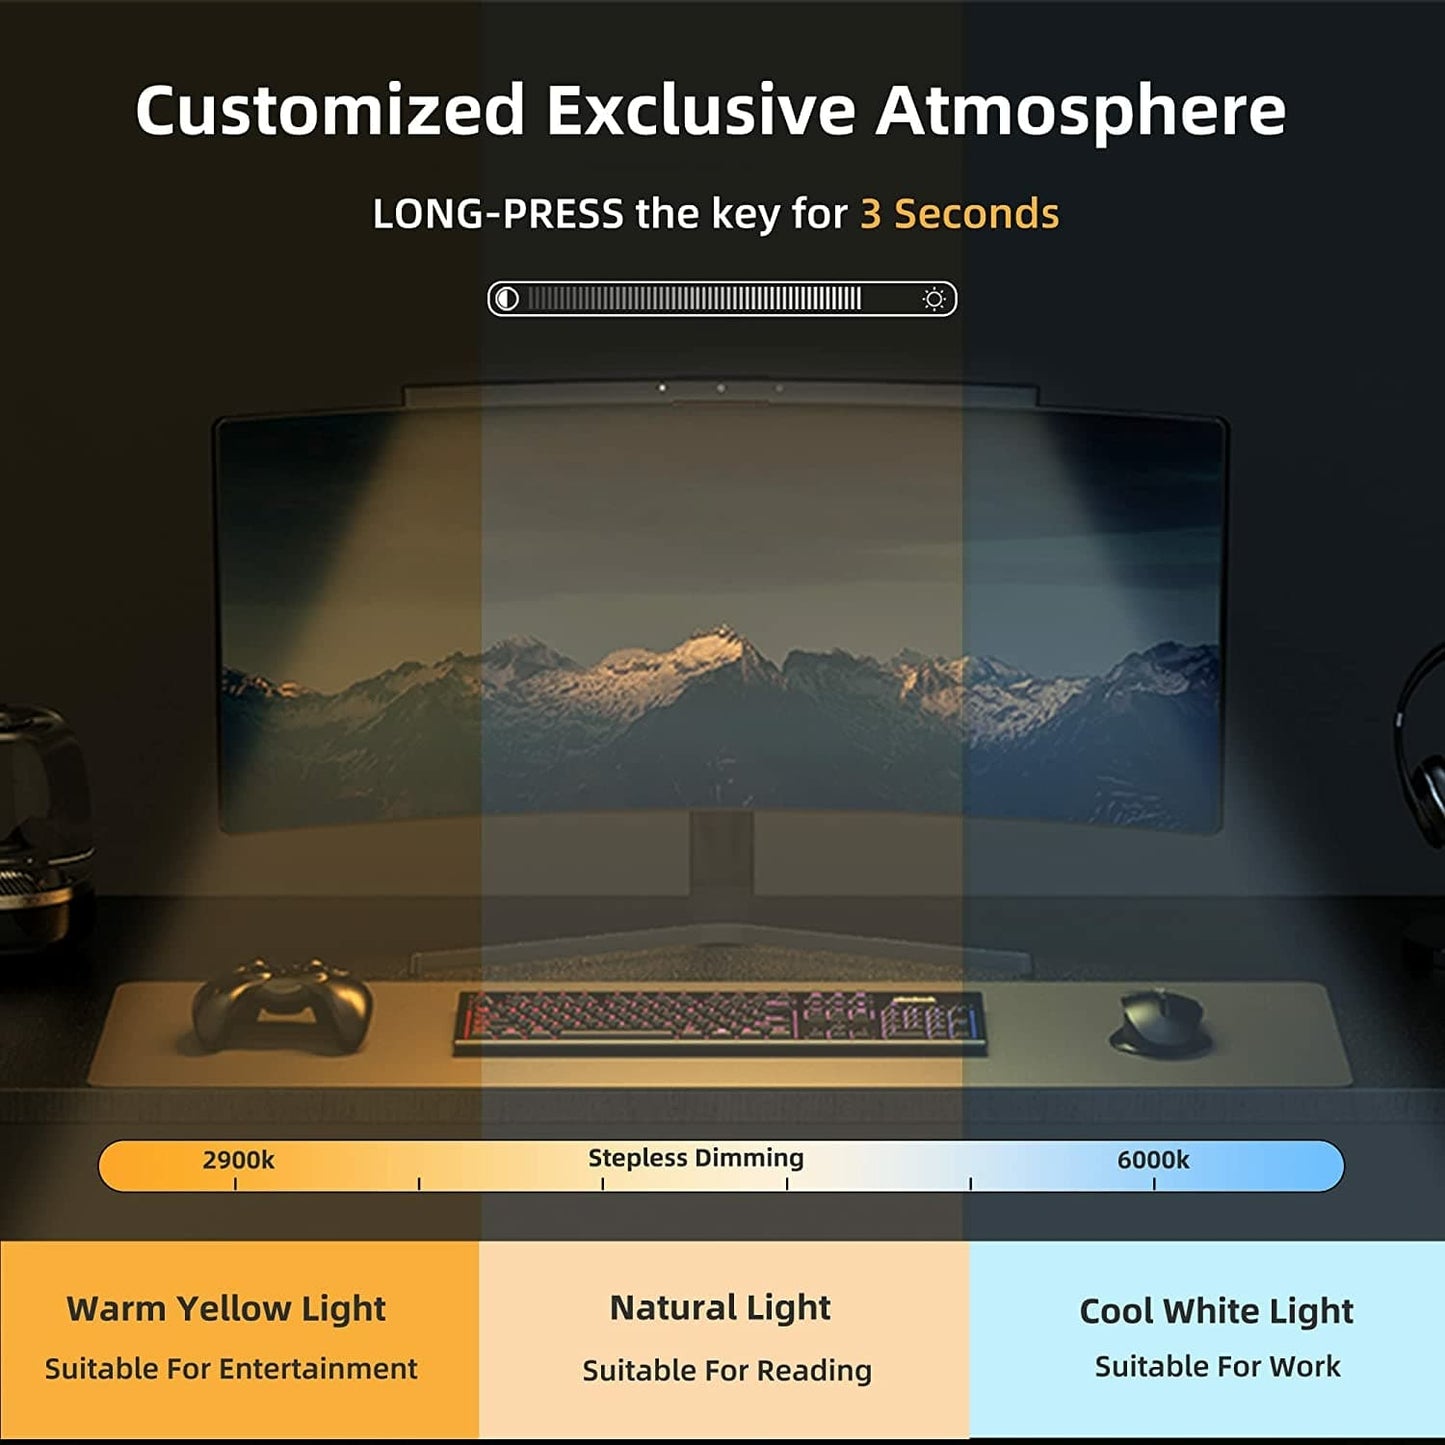 Detailed breakdown of the range of warmth and hue our LEDs can omit from the lamp. Ranging from a warm 2900k to a white 6000k, our light bar can handle any task. Suitable for watching video, reading, working and gaming.